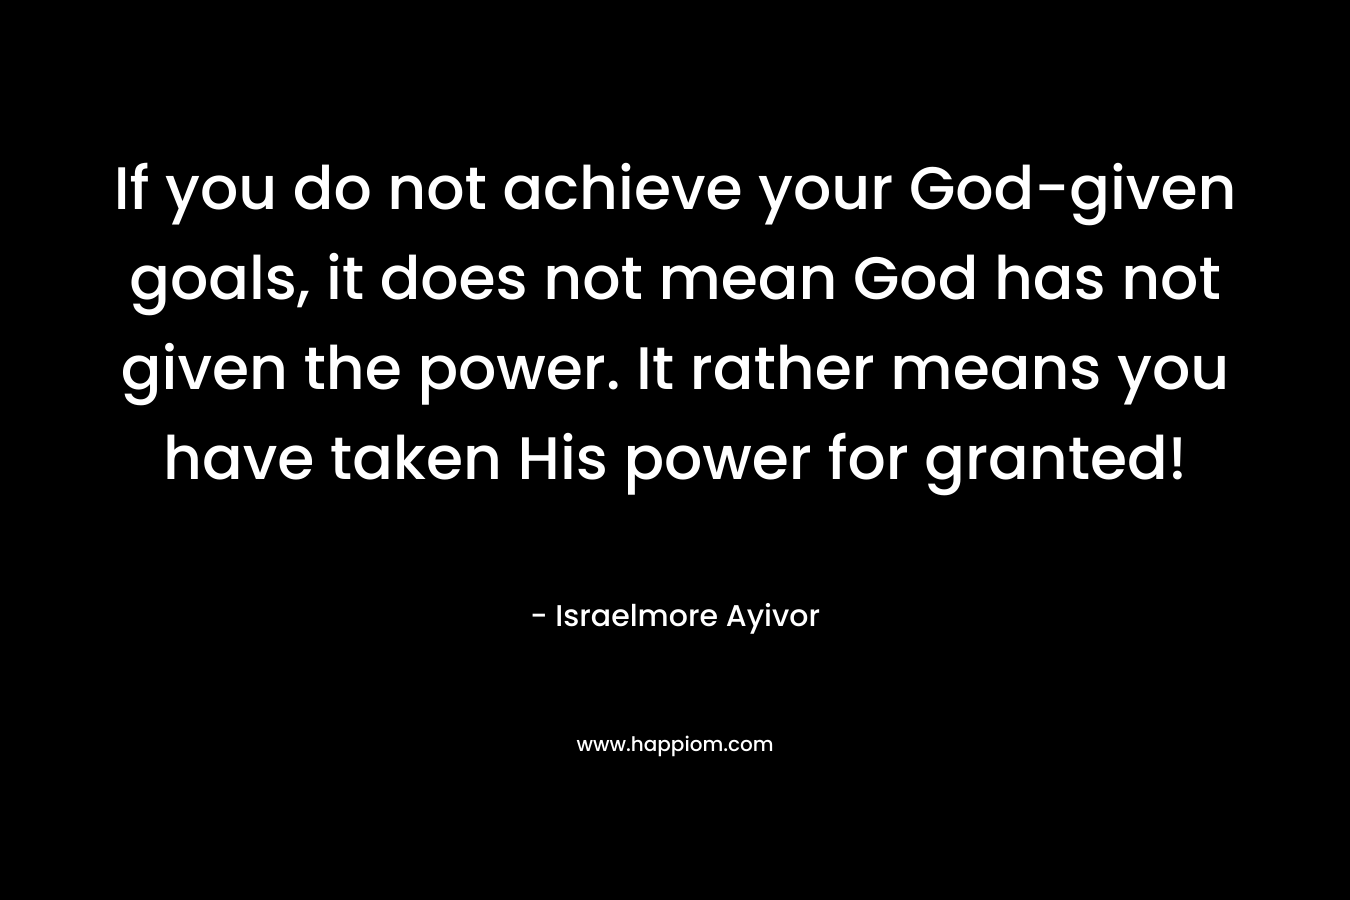 If you do not achieve your God-given goals, it does not mean God has not given the power. It rather means you have taken His power for granted!